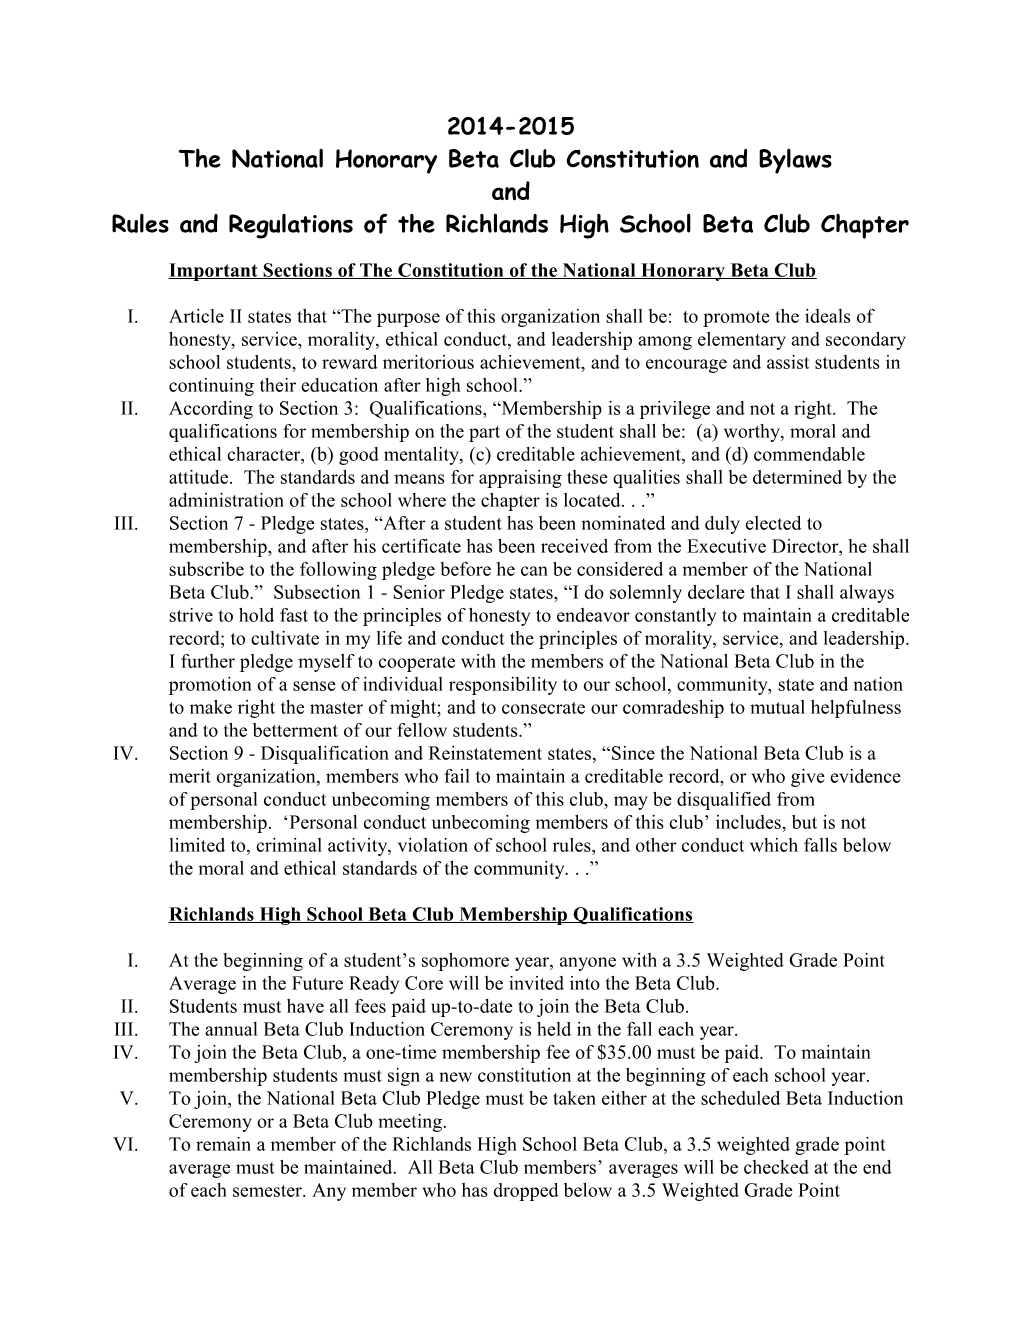 The National Honorary Beta Club Constitution and Bylaws